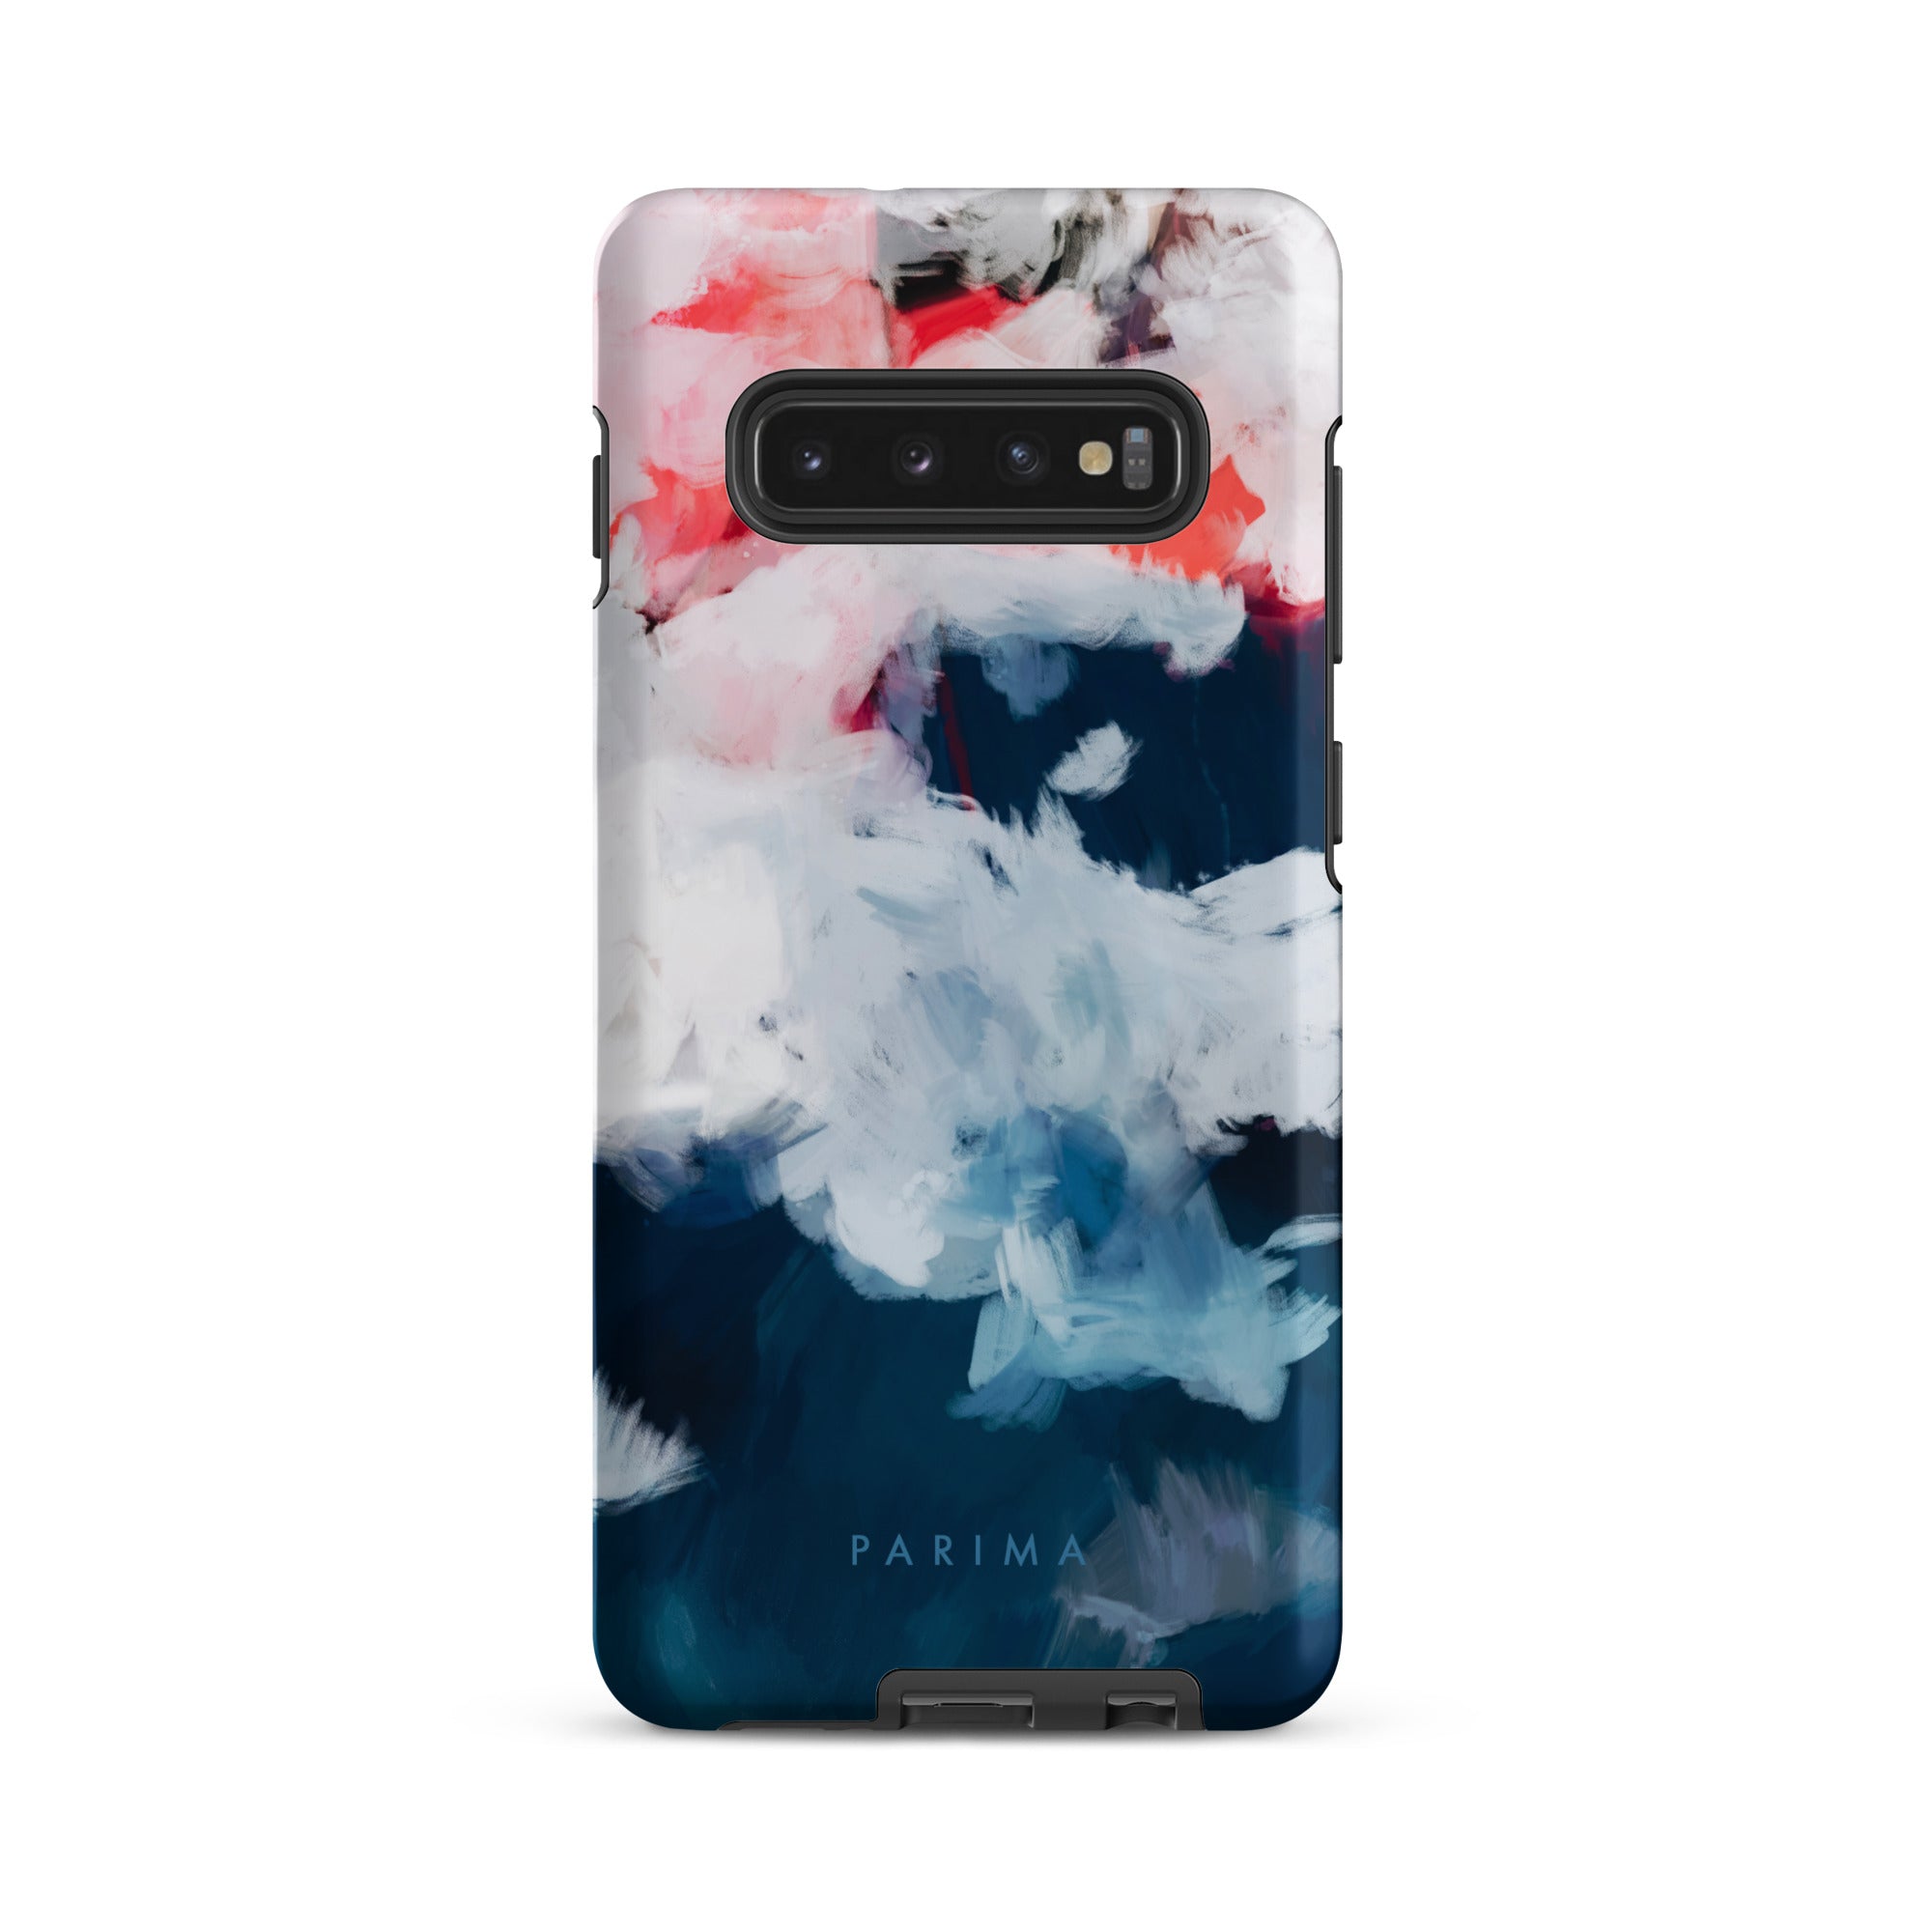 Oceane, blue and pink abstract art on Samsung Galaxy S10 Plus tough case by Parima Studio